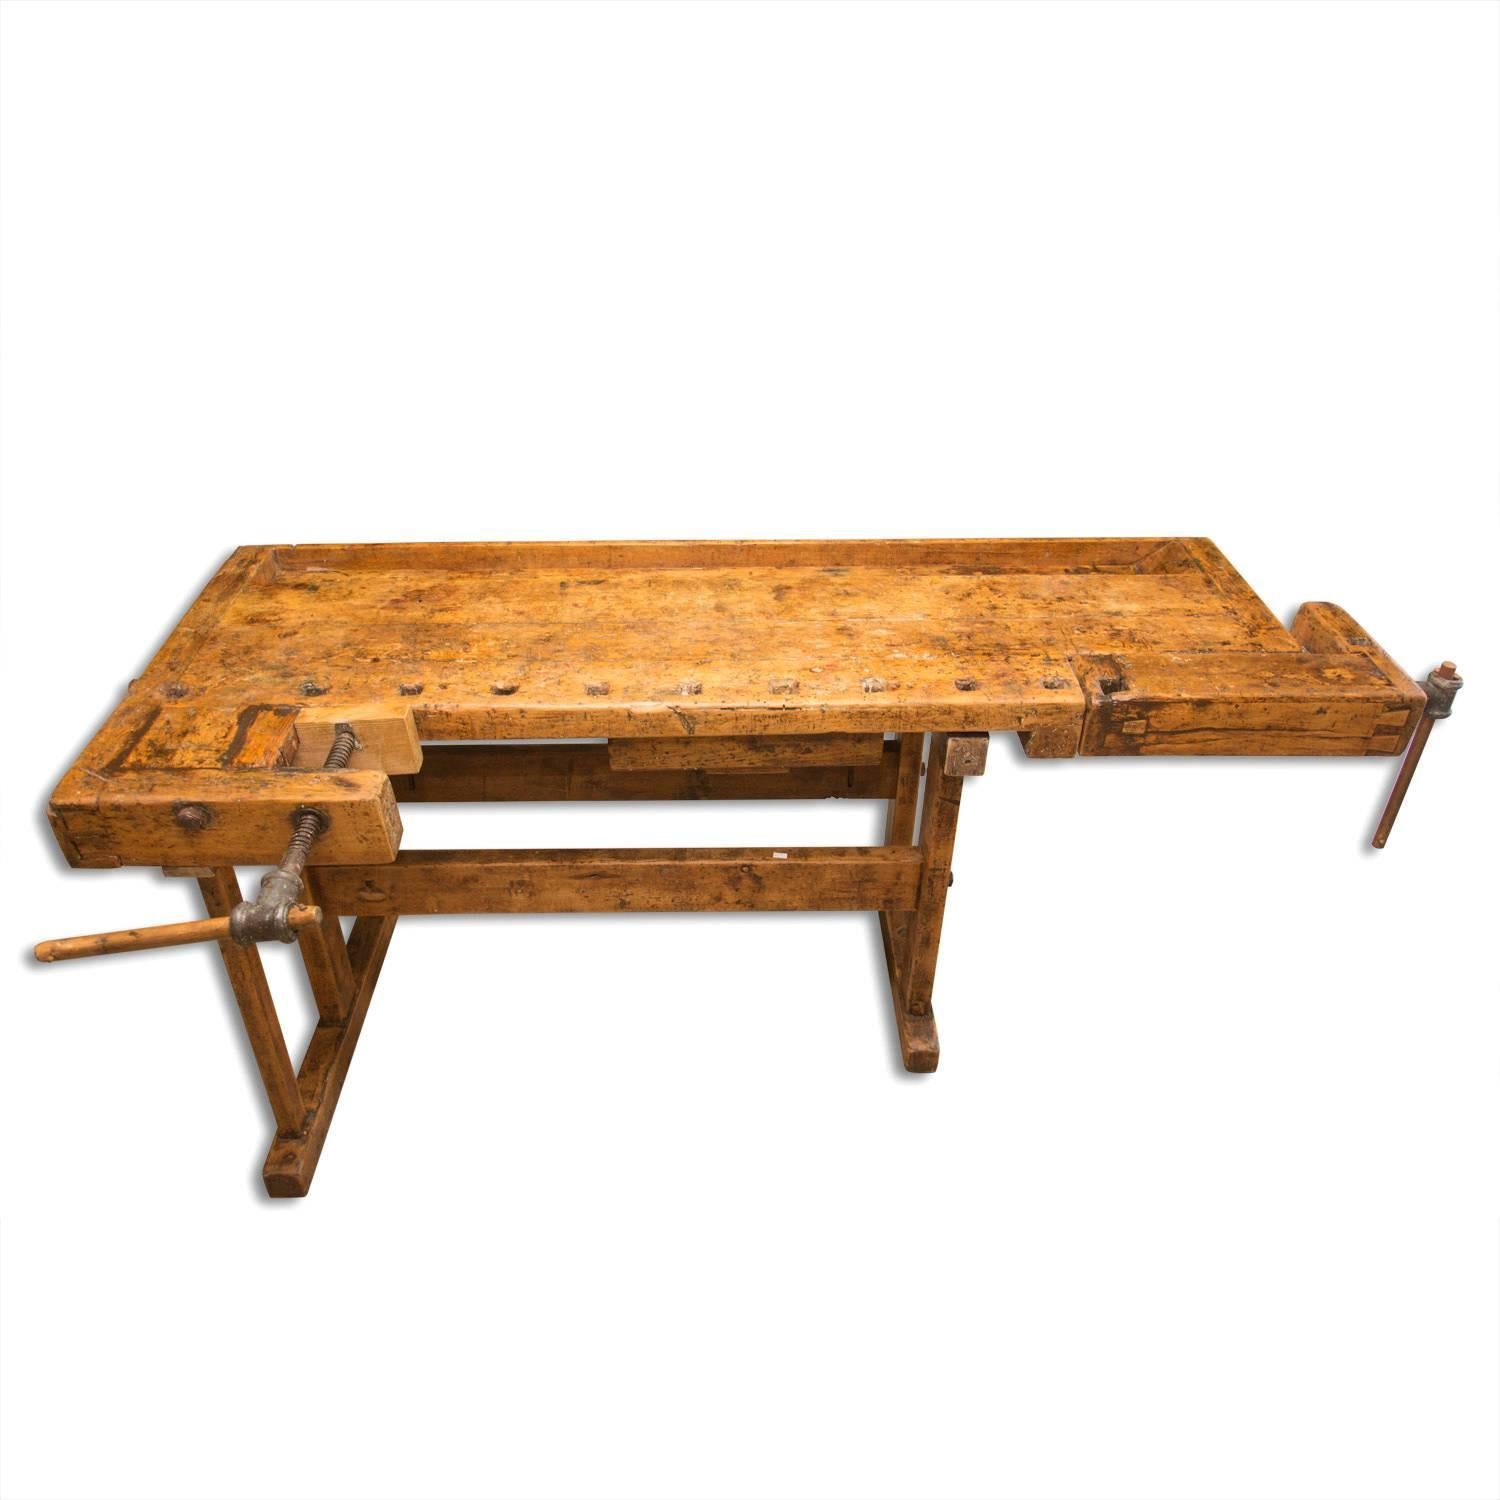 Antique European carpenters' workbench with very nice patina, made in the 1920s in Central Europe. It´s made of oakwood. It features one drawer, two wooden vices with wood handle. It has been restored and waxed using a beeswax. These workbenches are